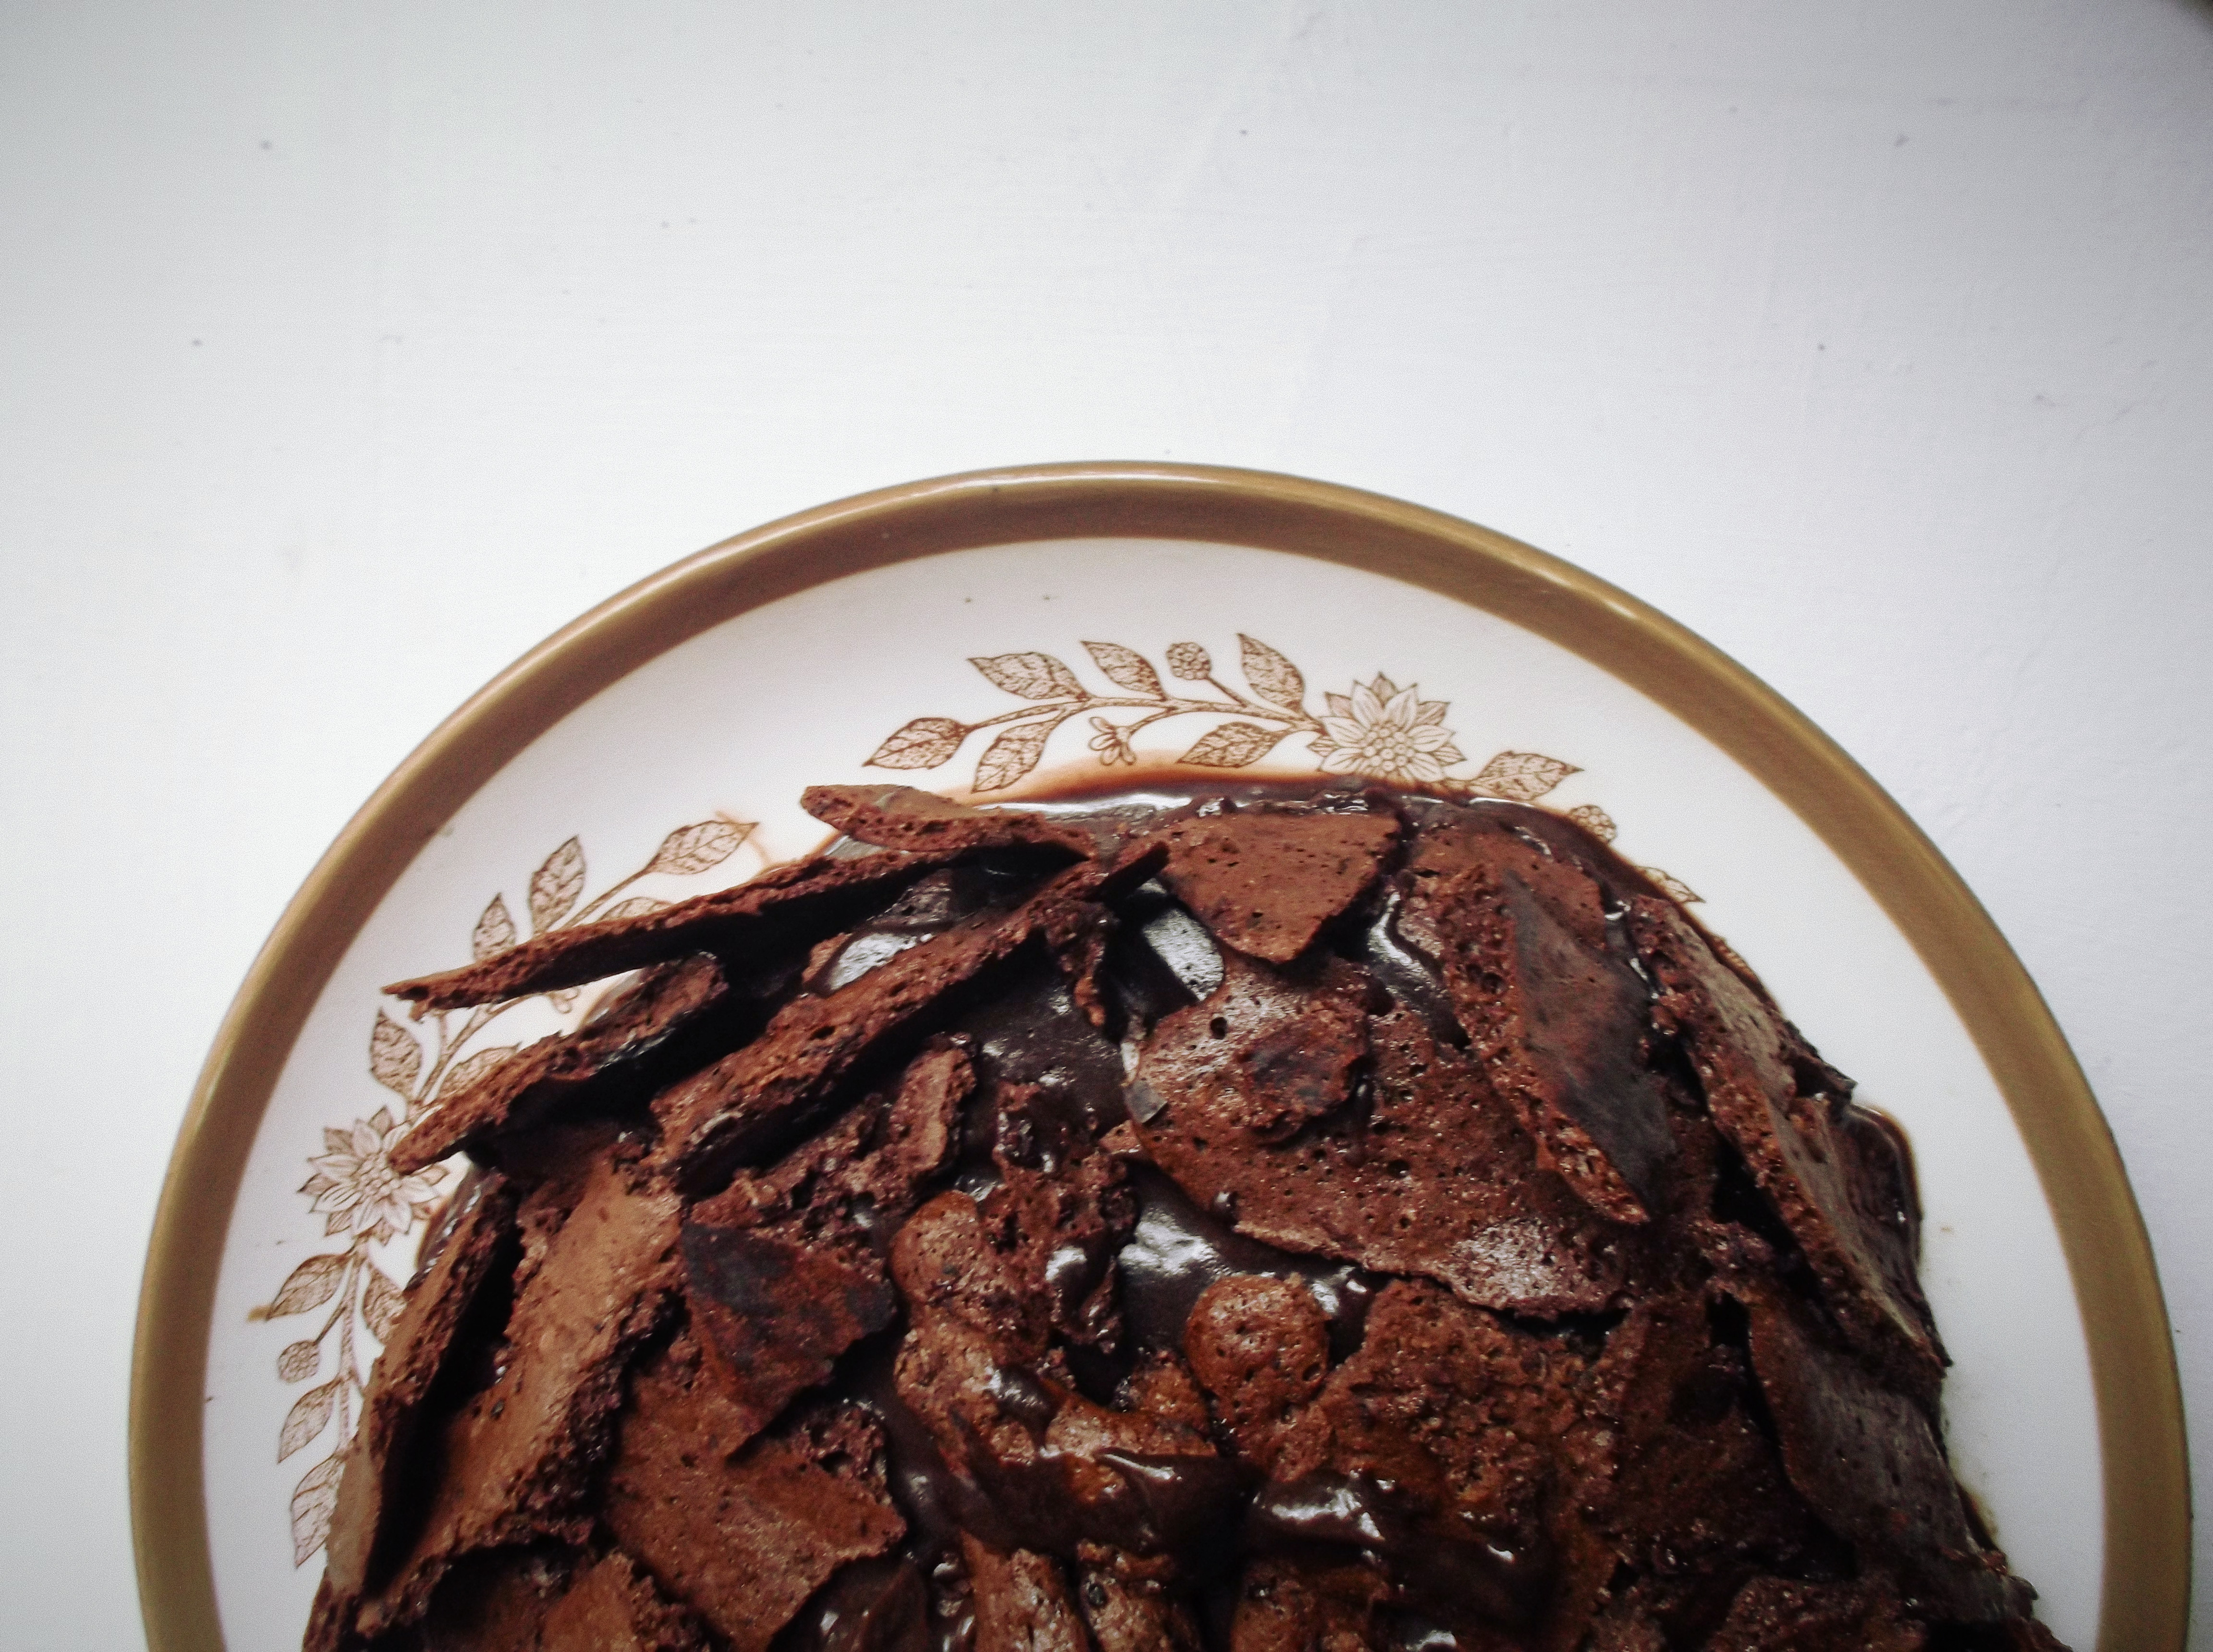 Julia Child’s Chocolate Mousse and My Take On Pierre Hermé’s Concorde Cake